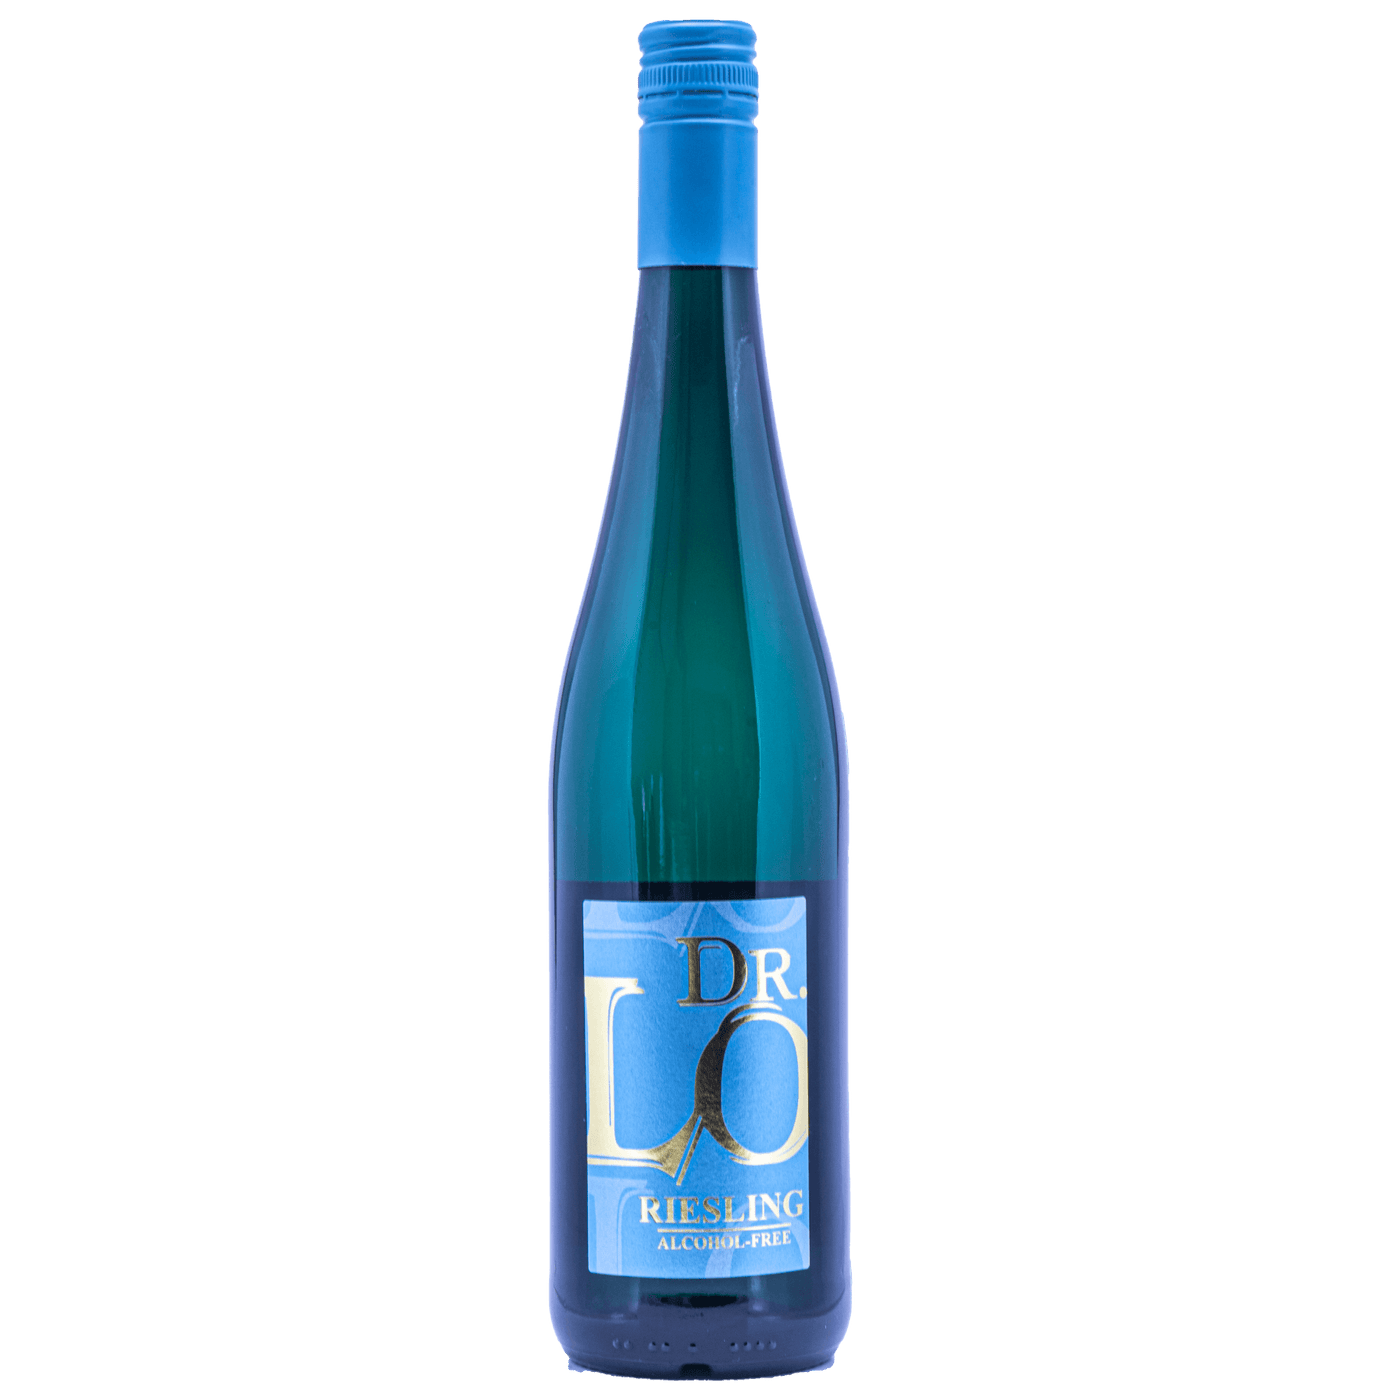 Dr. Lo Riesling ohne Alkohol 750 ml